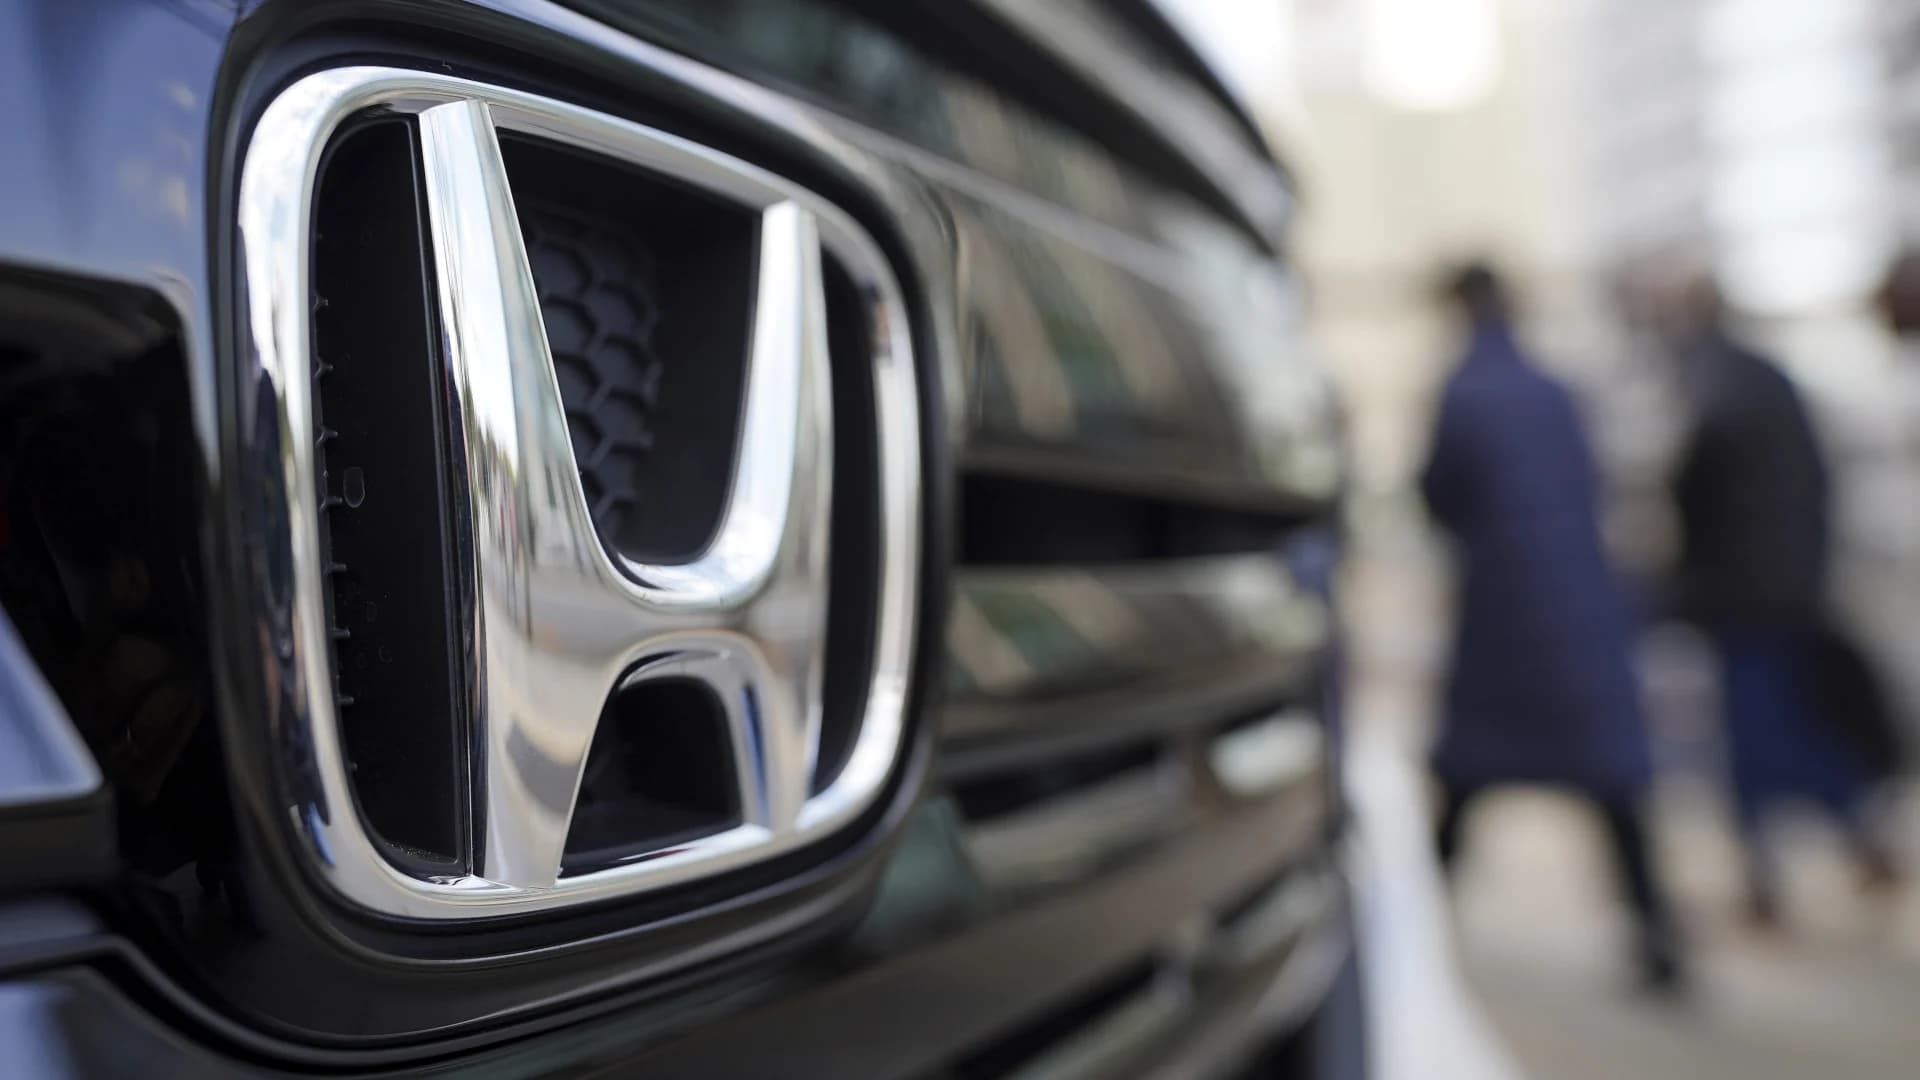 Honda recalls select Accords and HR-Vs over missing piece in seat belt pretensioners